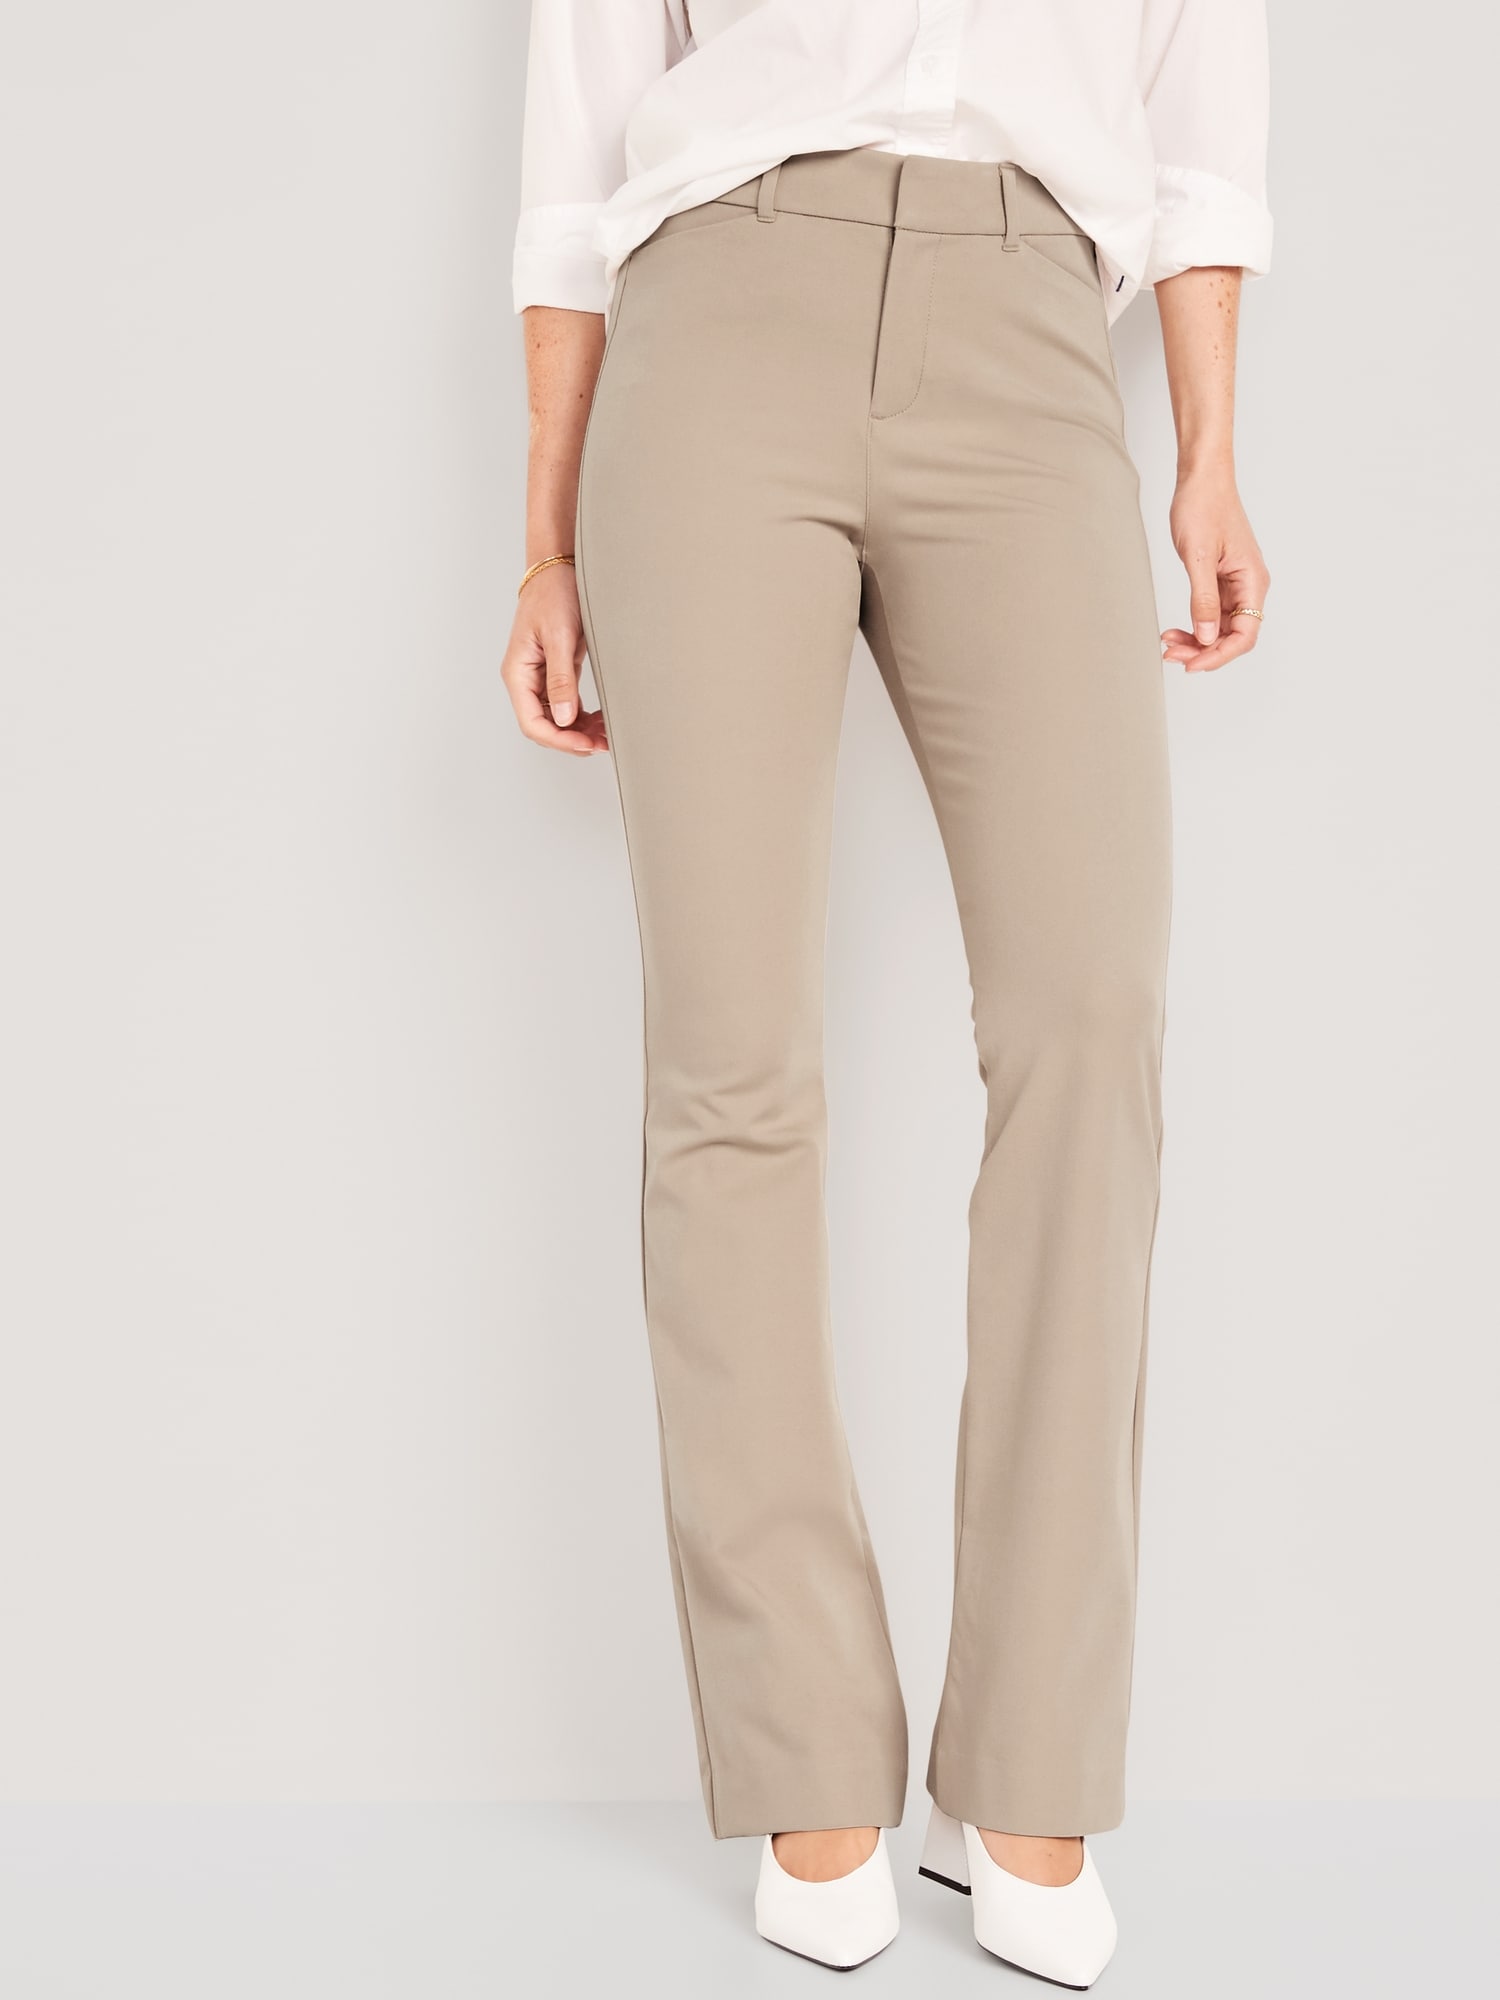 Plus Size High Waisted Pull On Dress Pants - Olive